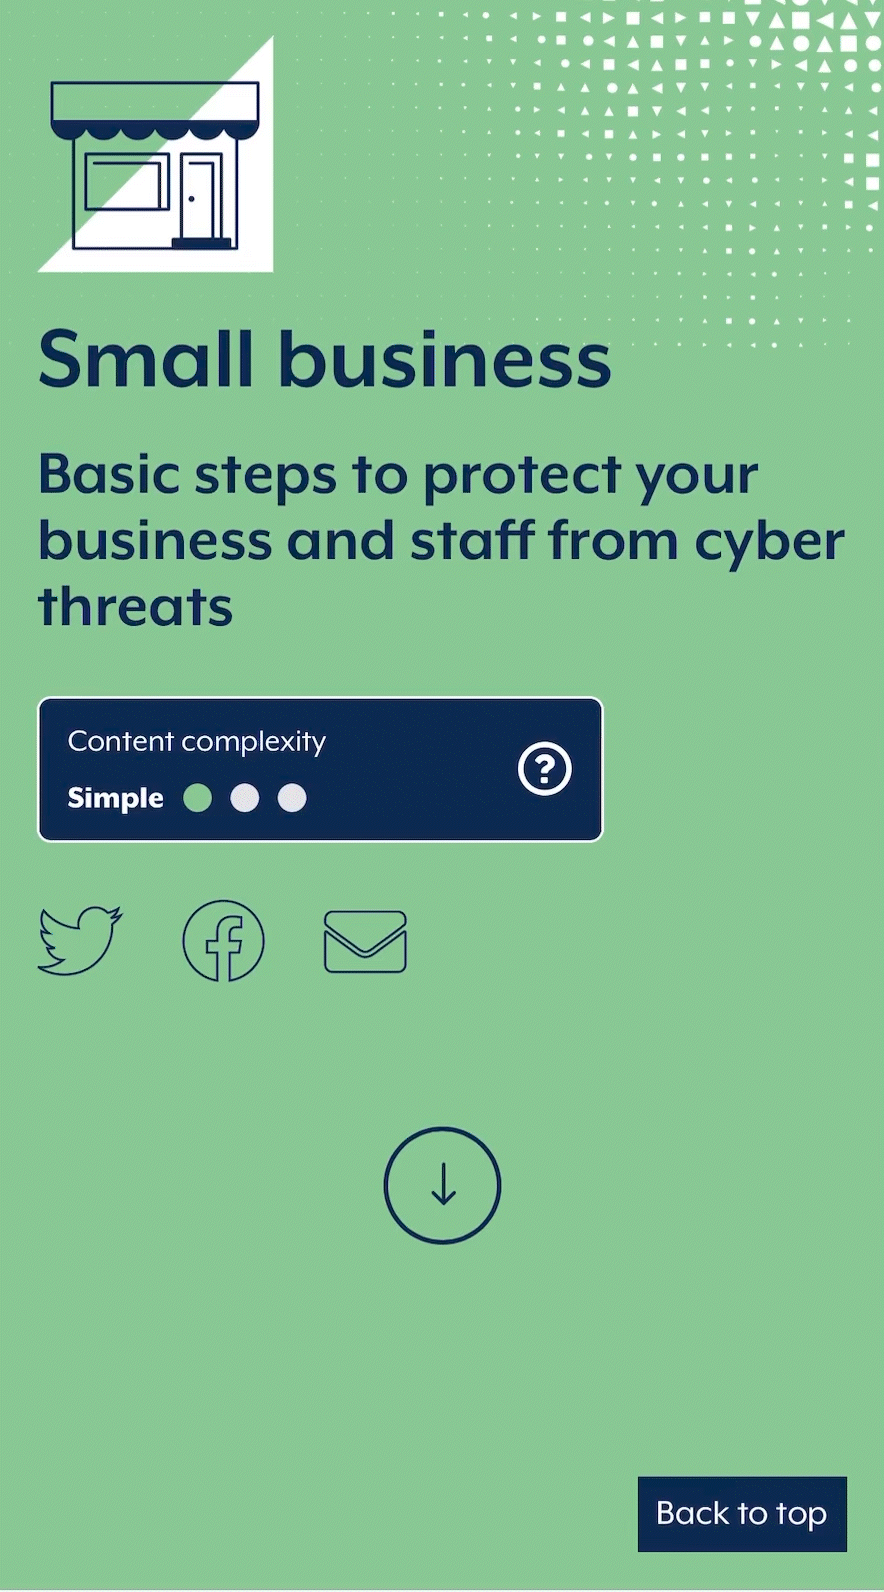 Cyber security solutions - Cyber SMB preparedness